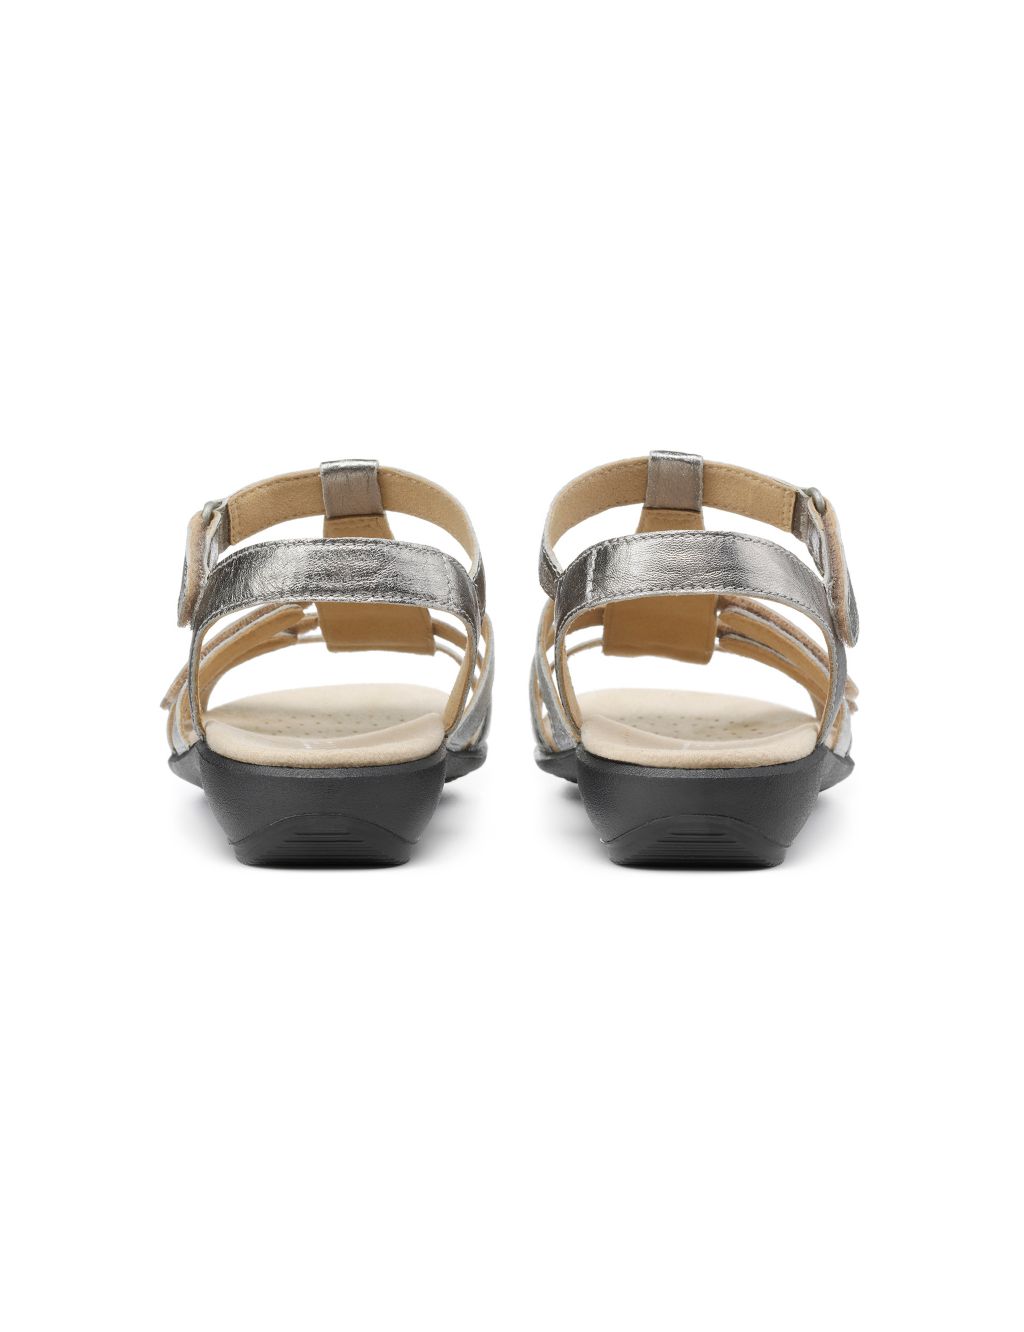 Sol Wide Fit Leather Metallic Sandals image 3